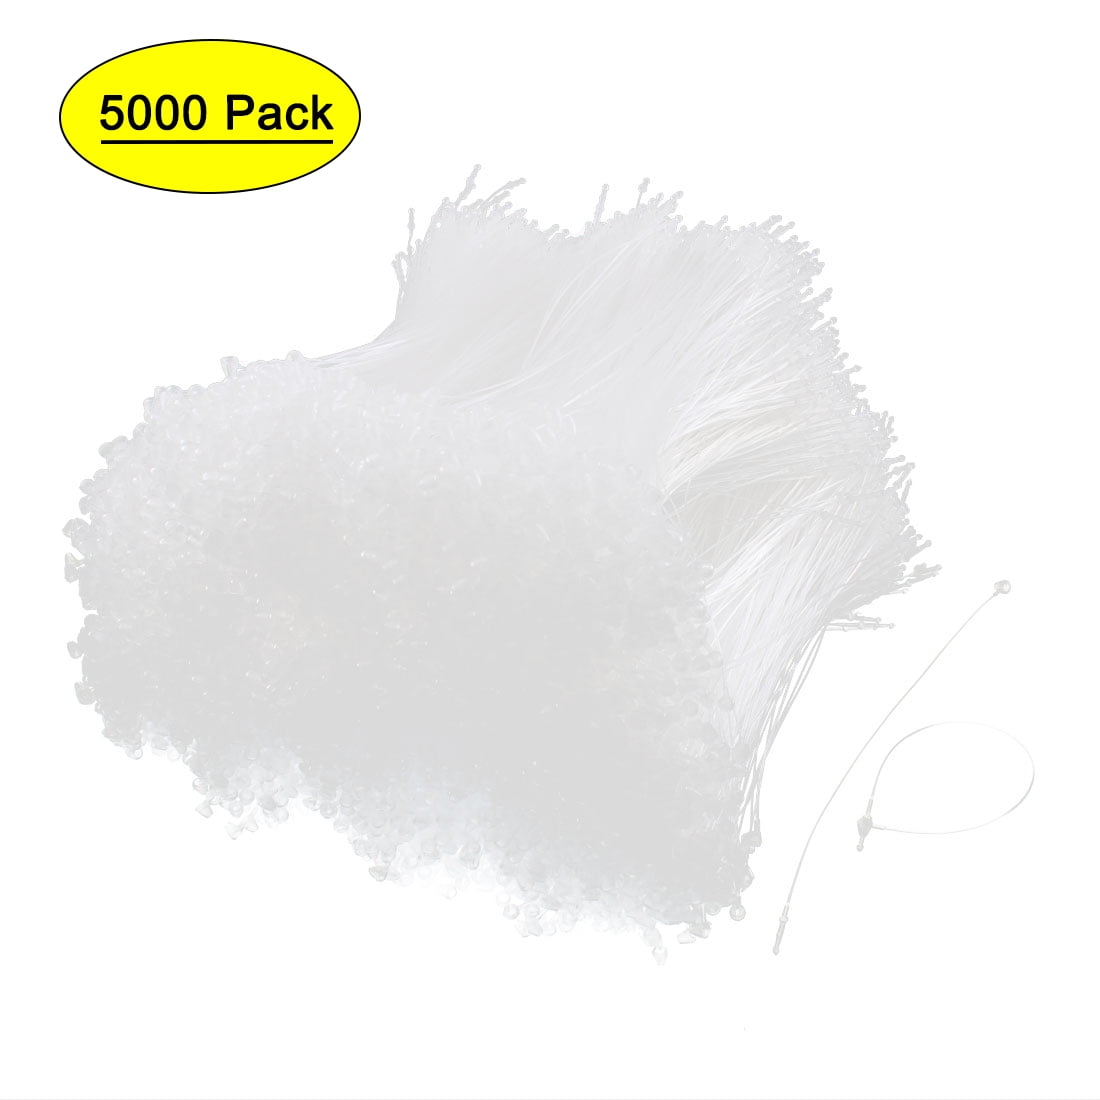 1,000 per pack over 100k Avail Sensormatic Tack Gray Plastic 5/8" Grooved Pin 